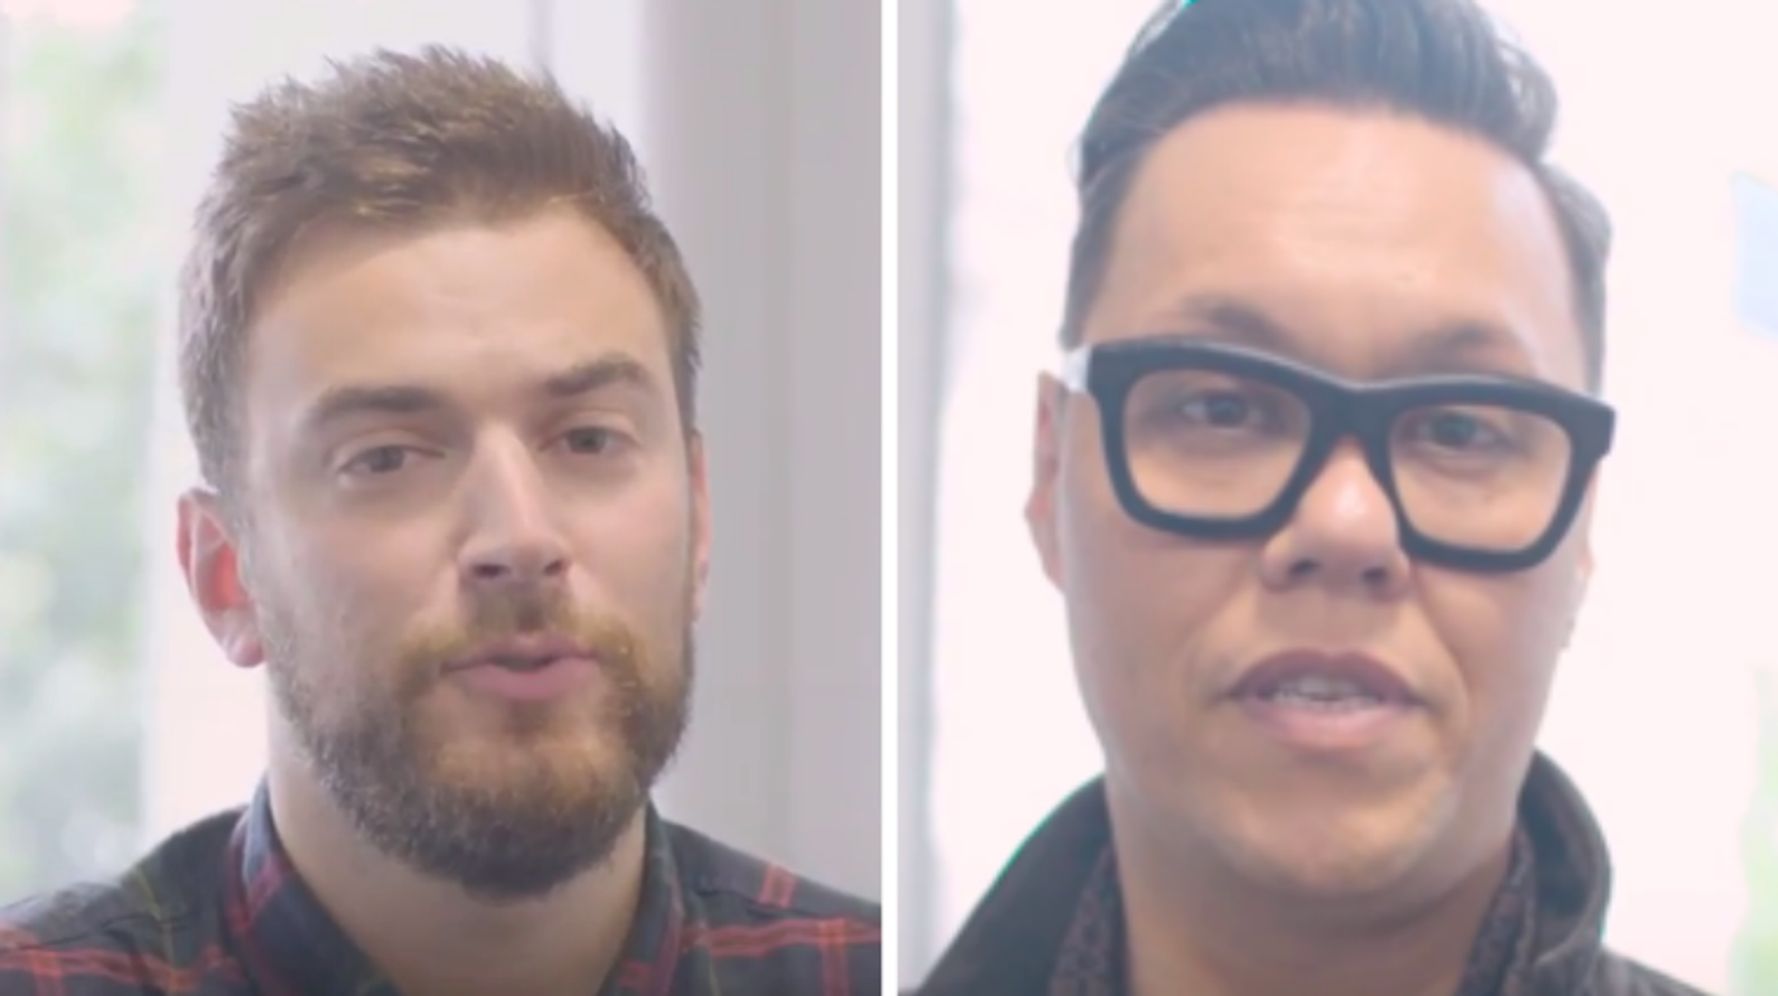 Gok Wan Joins Activists To Deliver Emotional Advice For Bullied Lgbt